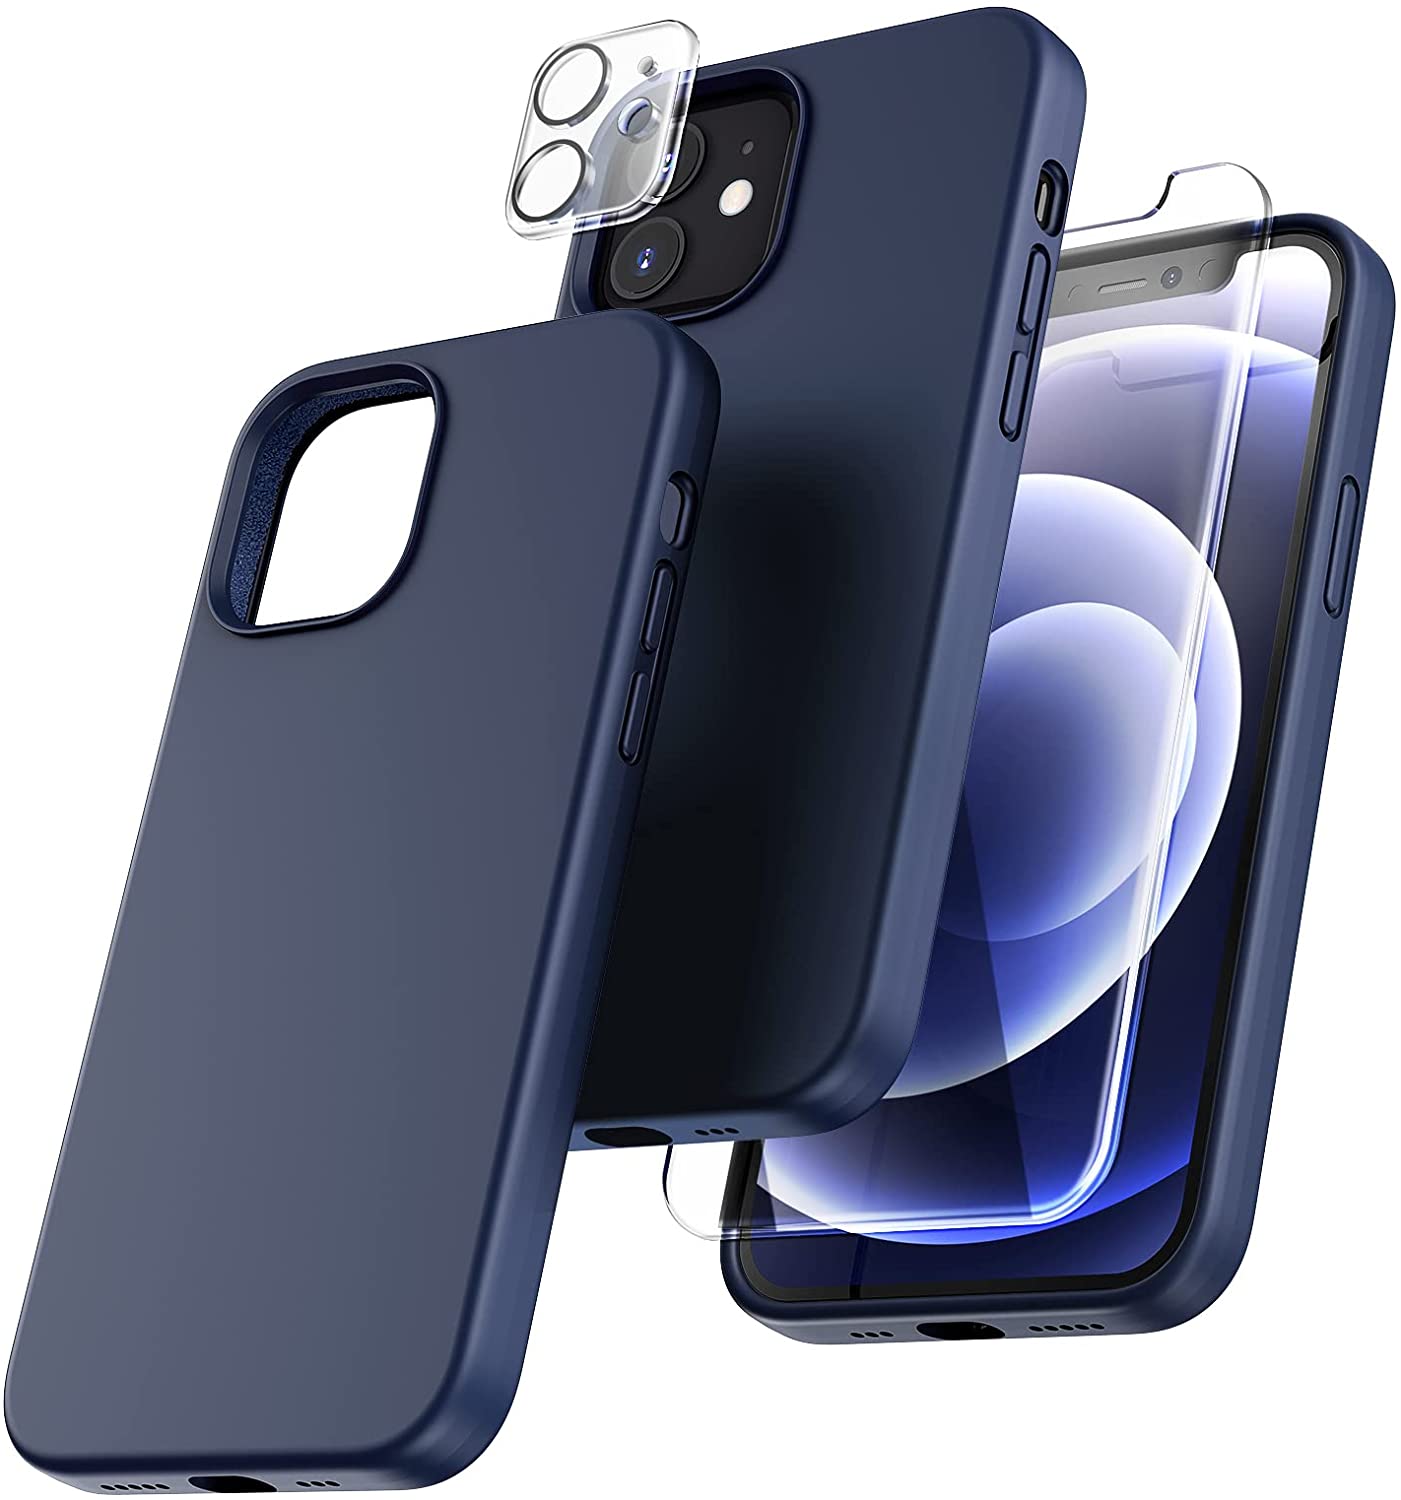 TOCOL [5 in 1] for iPhone 12 Case, for iPhone 12 Pro Case, with 2 Pack Screen Protector + 2 Pack Camera Lens Protector, Silicone Shockproof Phone Case [Anti-Scratch] [Drop Protection], Blue